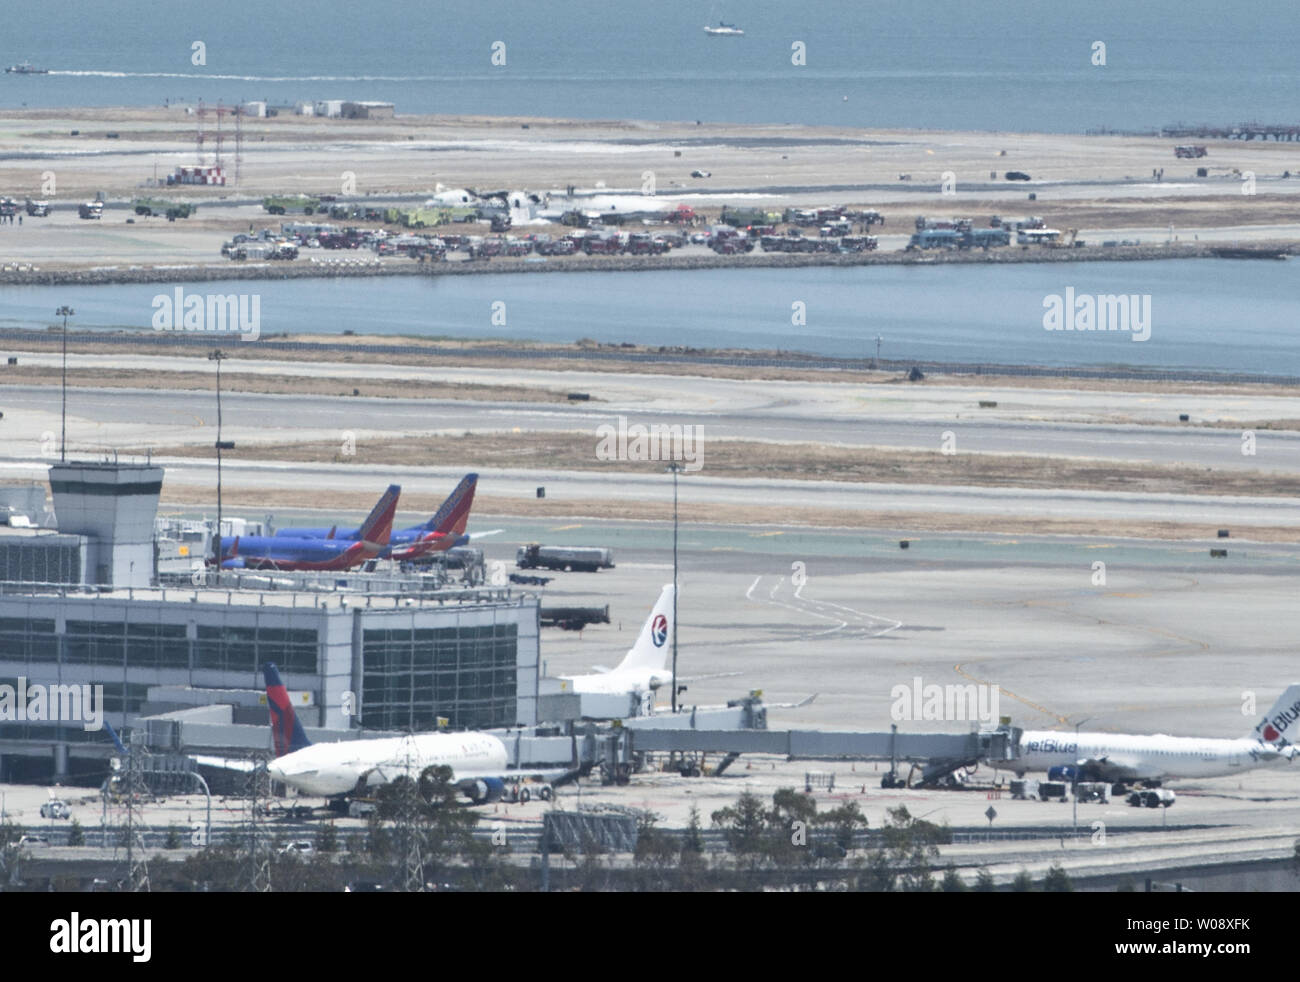 Emergency vehicles surround the remains of an Asiana Air Boeing 777 (background) on the runway at San Francisco International Airport after it crashed on landing in San Francisco on July 6, 2013. The plane was arriving from Seoul.    UPI/Terry Schmitt Stock Photo